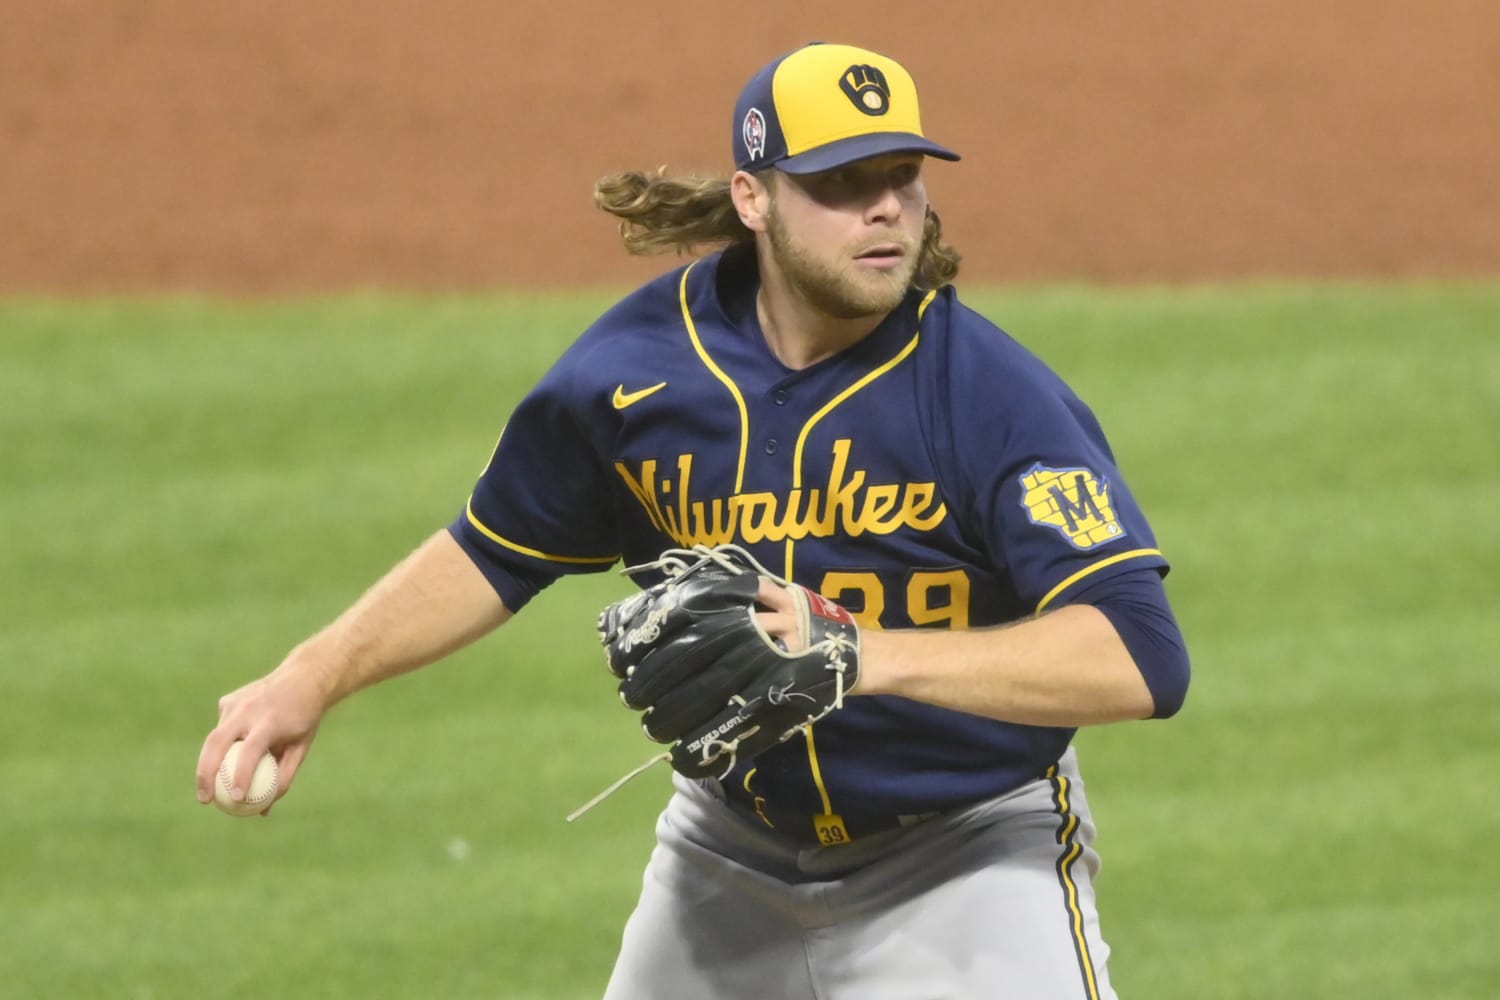 Have You Tried Turning Corbin Burnes Off, Then Turning Him Back On Again?